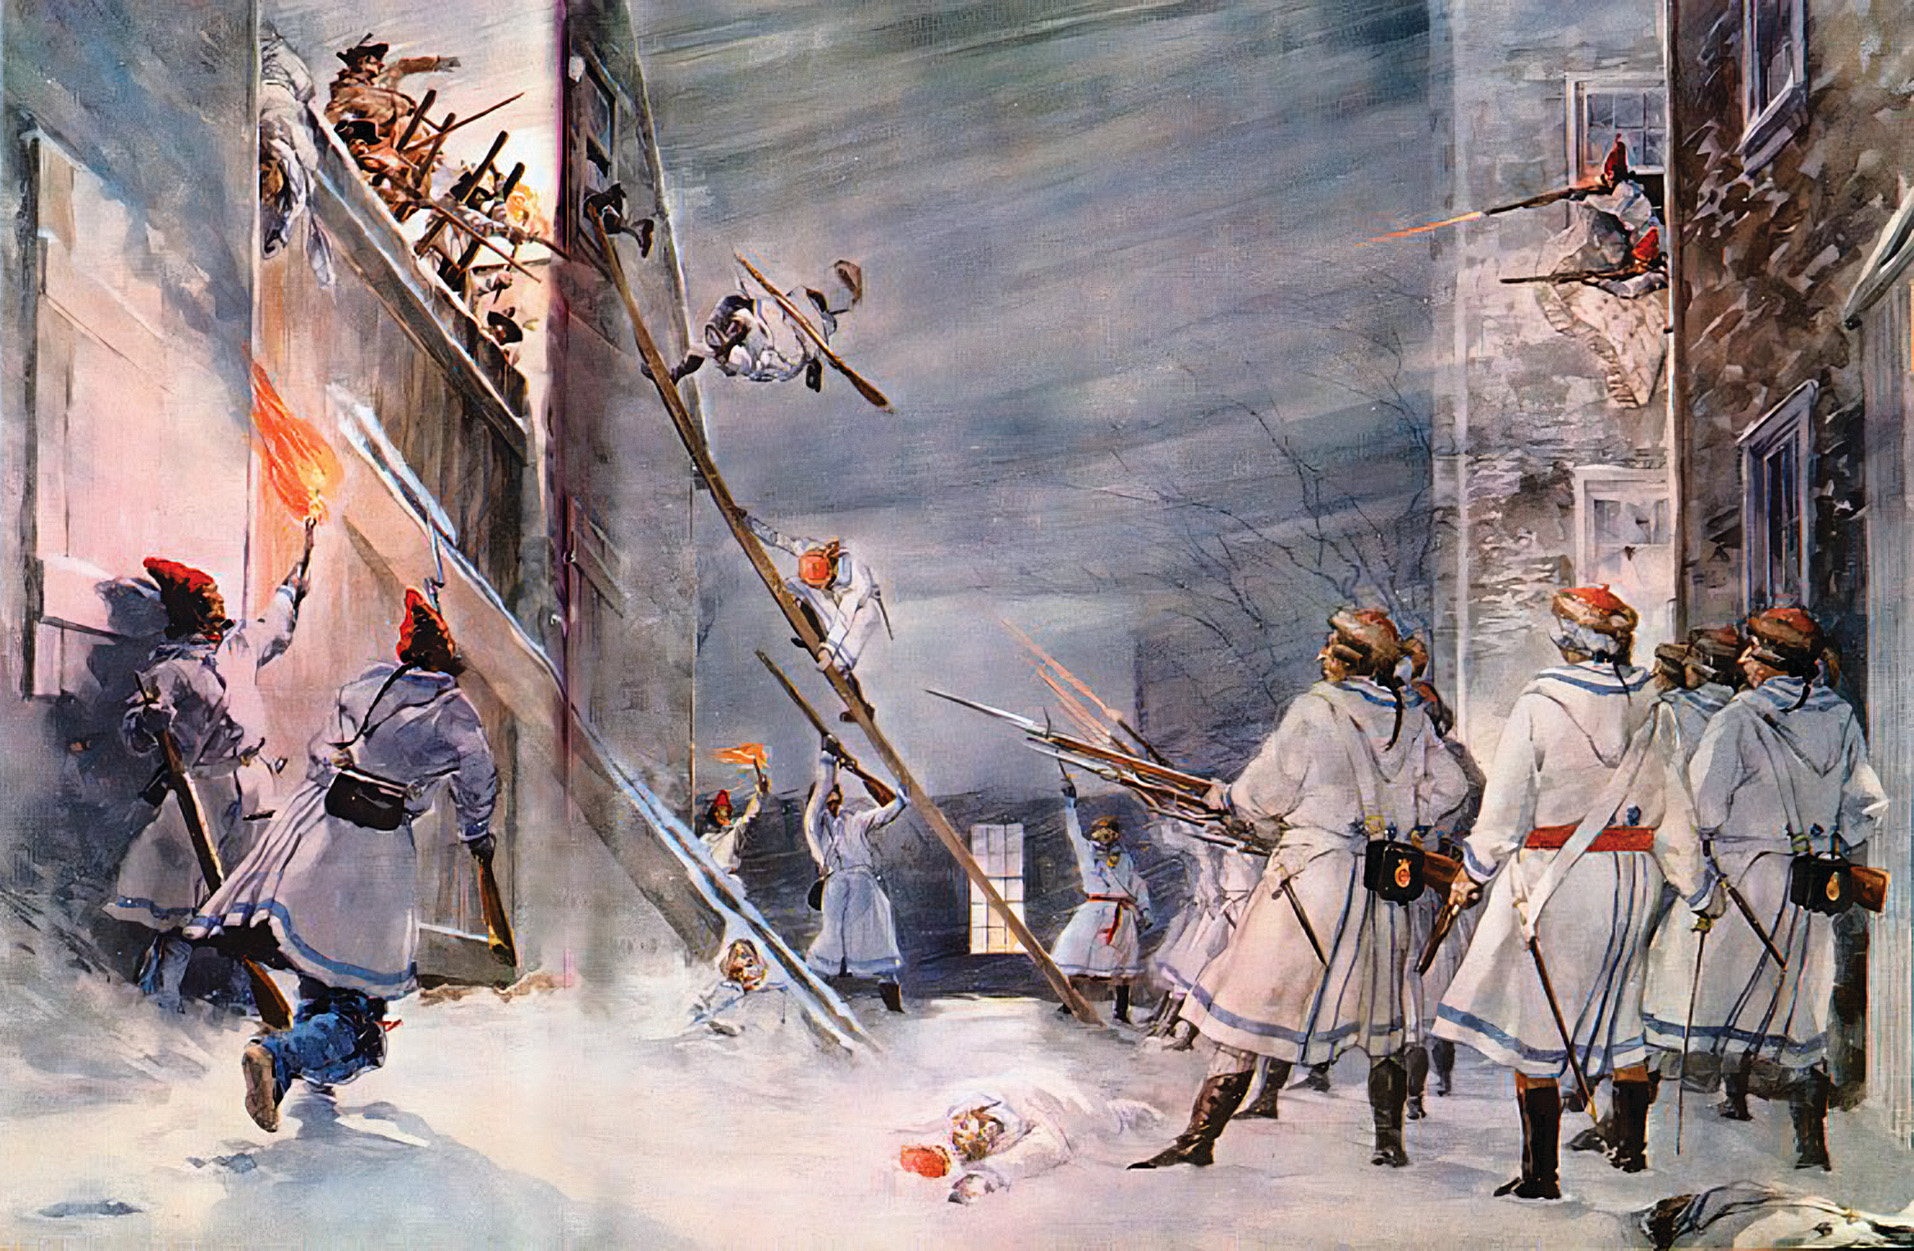 Following a Herculean march through the wilds of northern Maine with Colonel Benedict Arnold, Morgan’s riflemen clamber over the walls of Quebec under fire from Canadian militia on December 31, 1775. Morgan ultimately was captured in the disastrous Battle of Quebec.